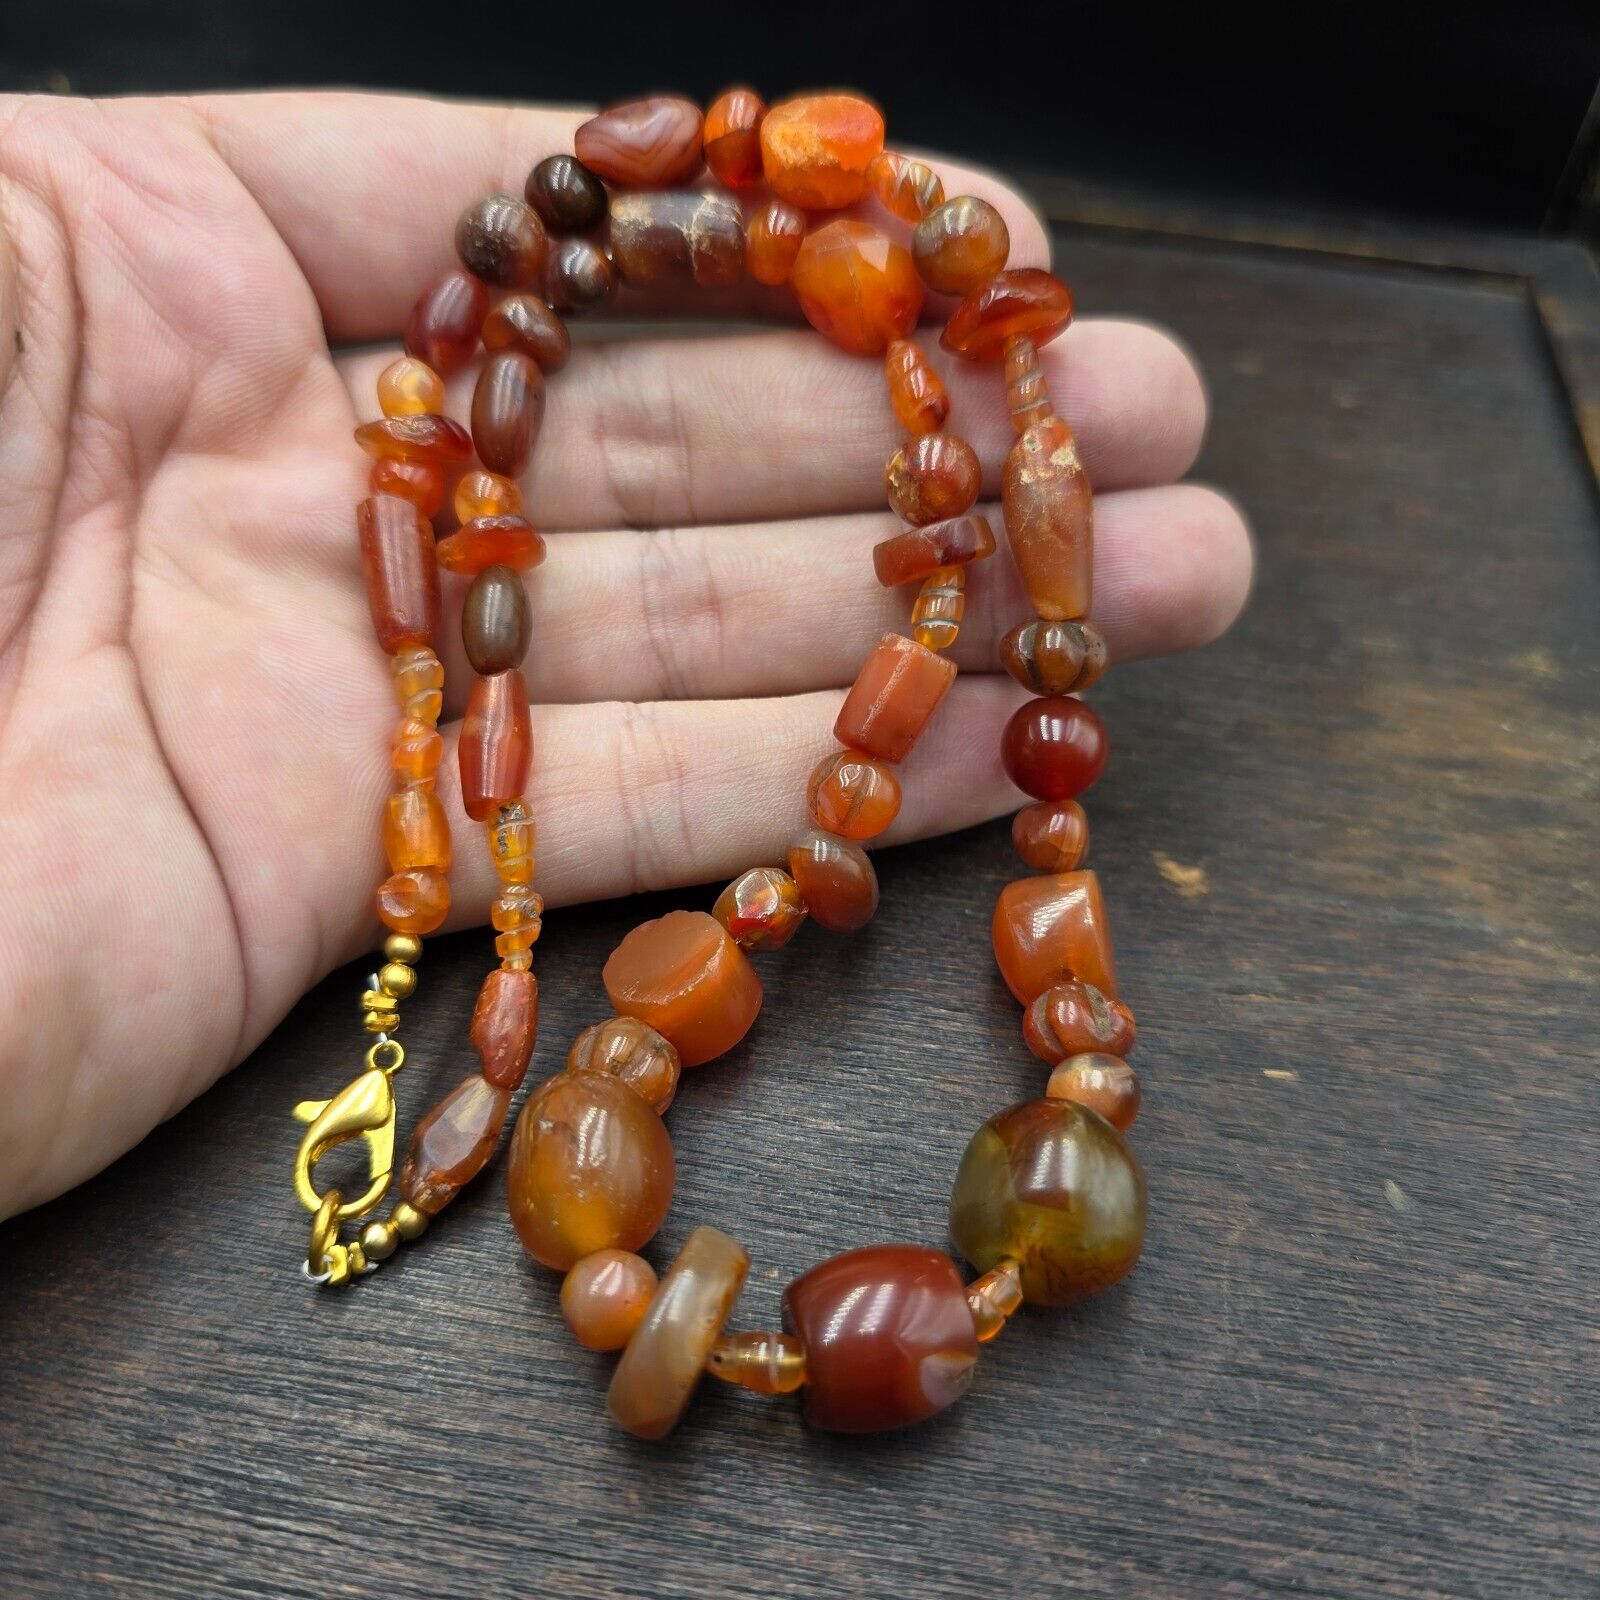 Old Antique Persian Himalayan Carnelian Beads Agate Jewelry necklace